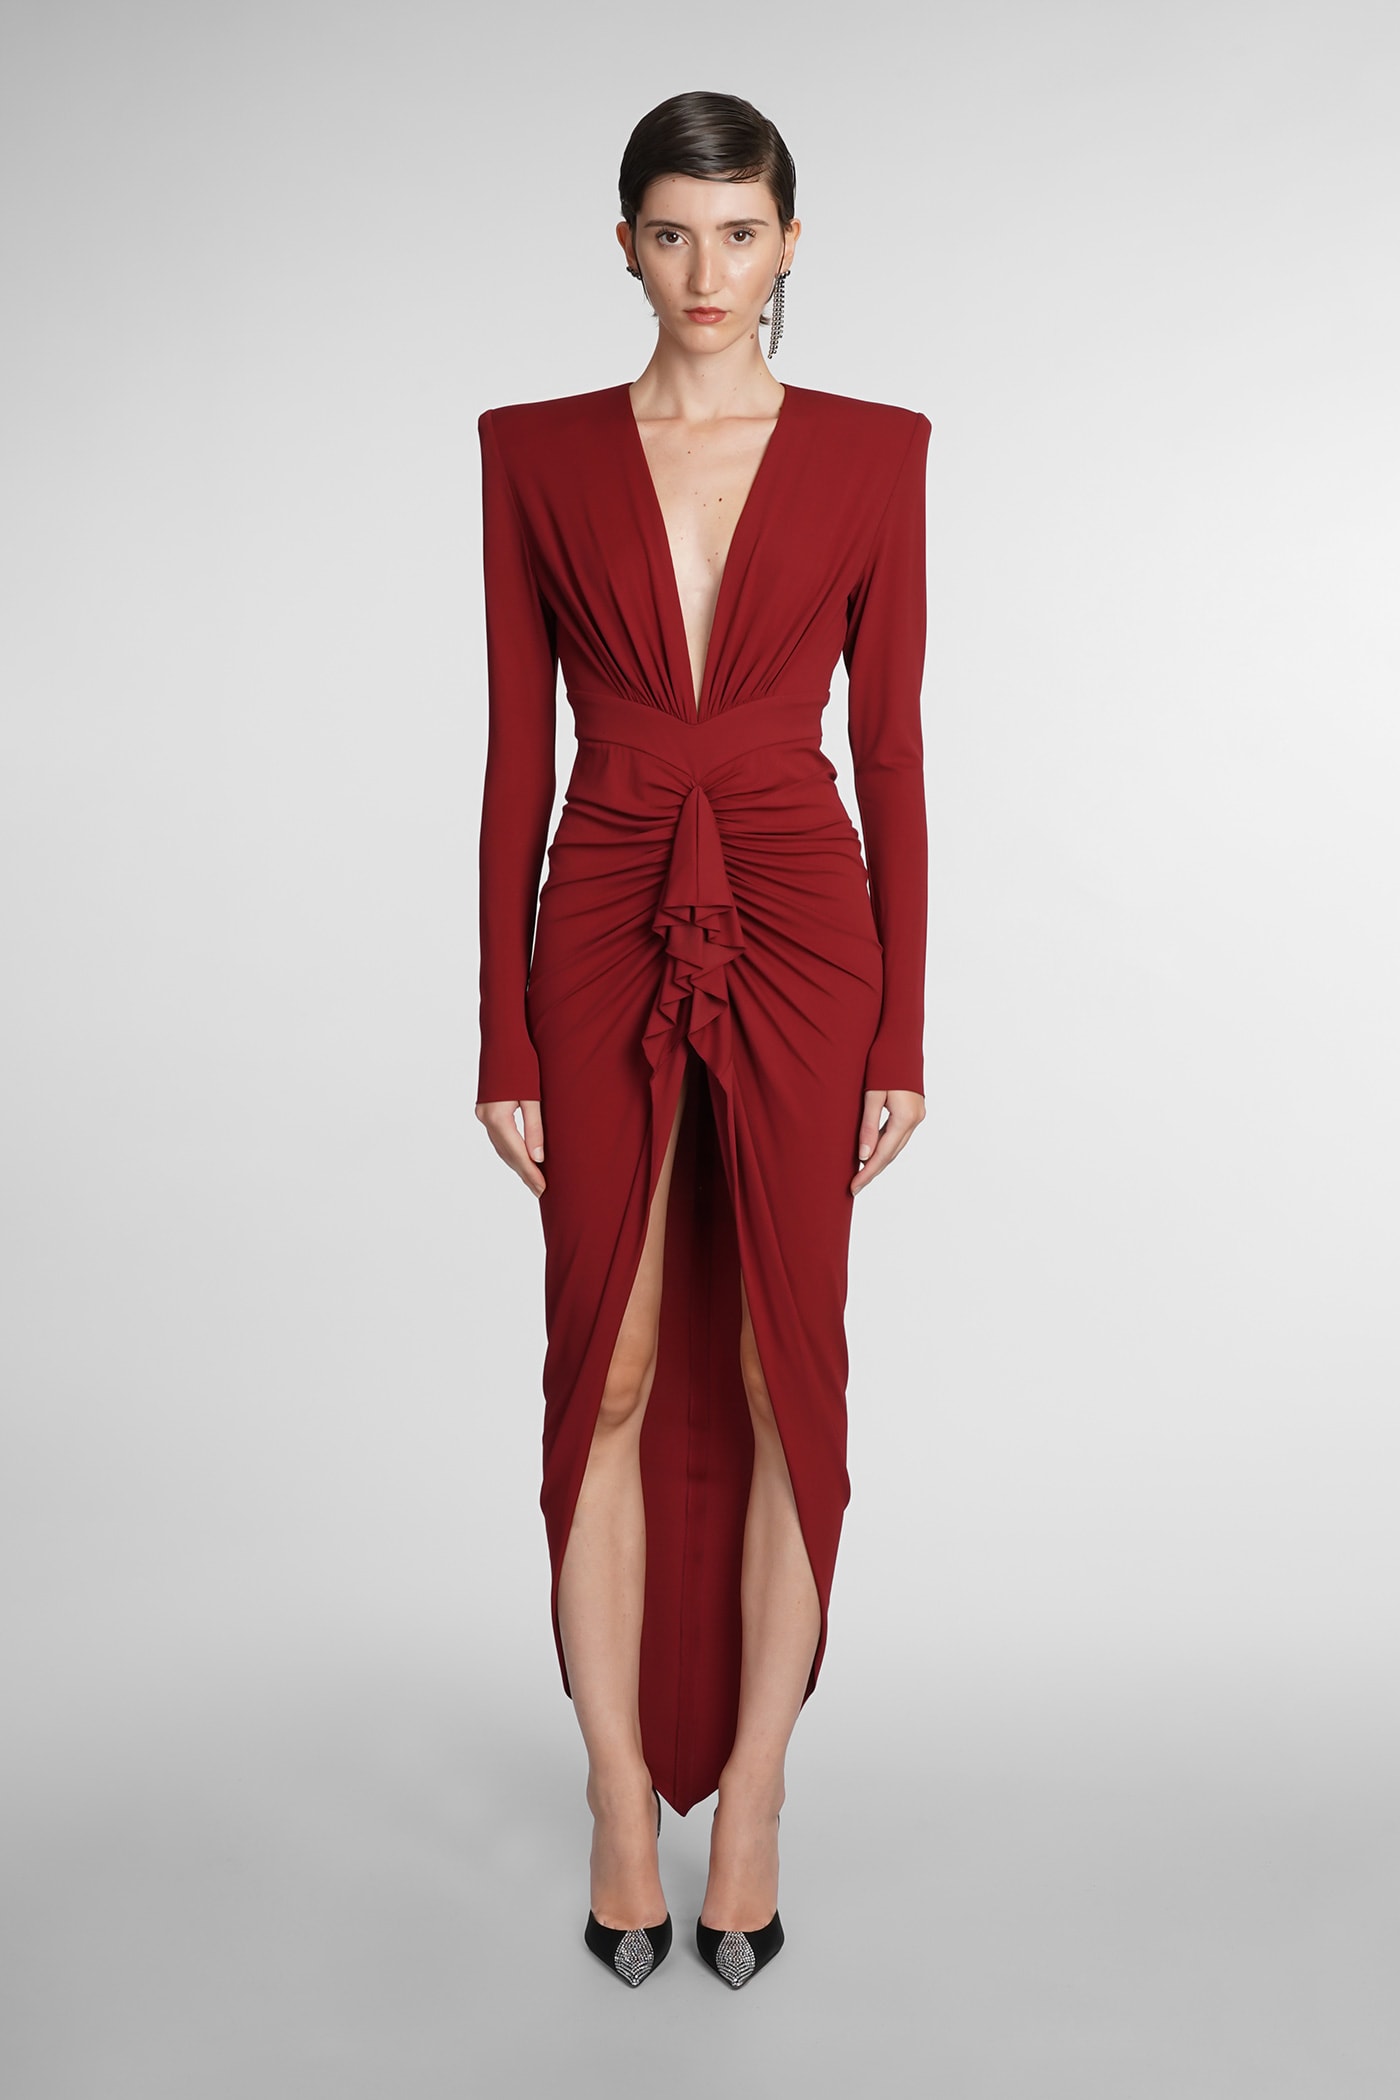 ALEXANDRE VAUTHIER DRESS IN RED VISCOSE